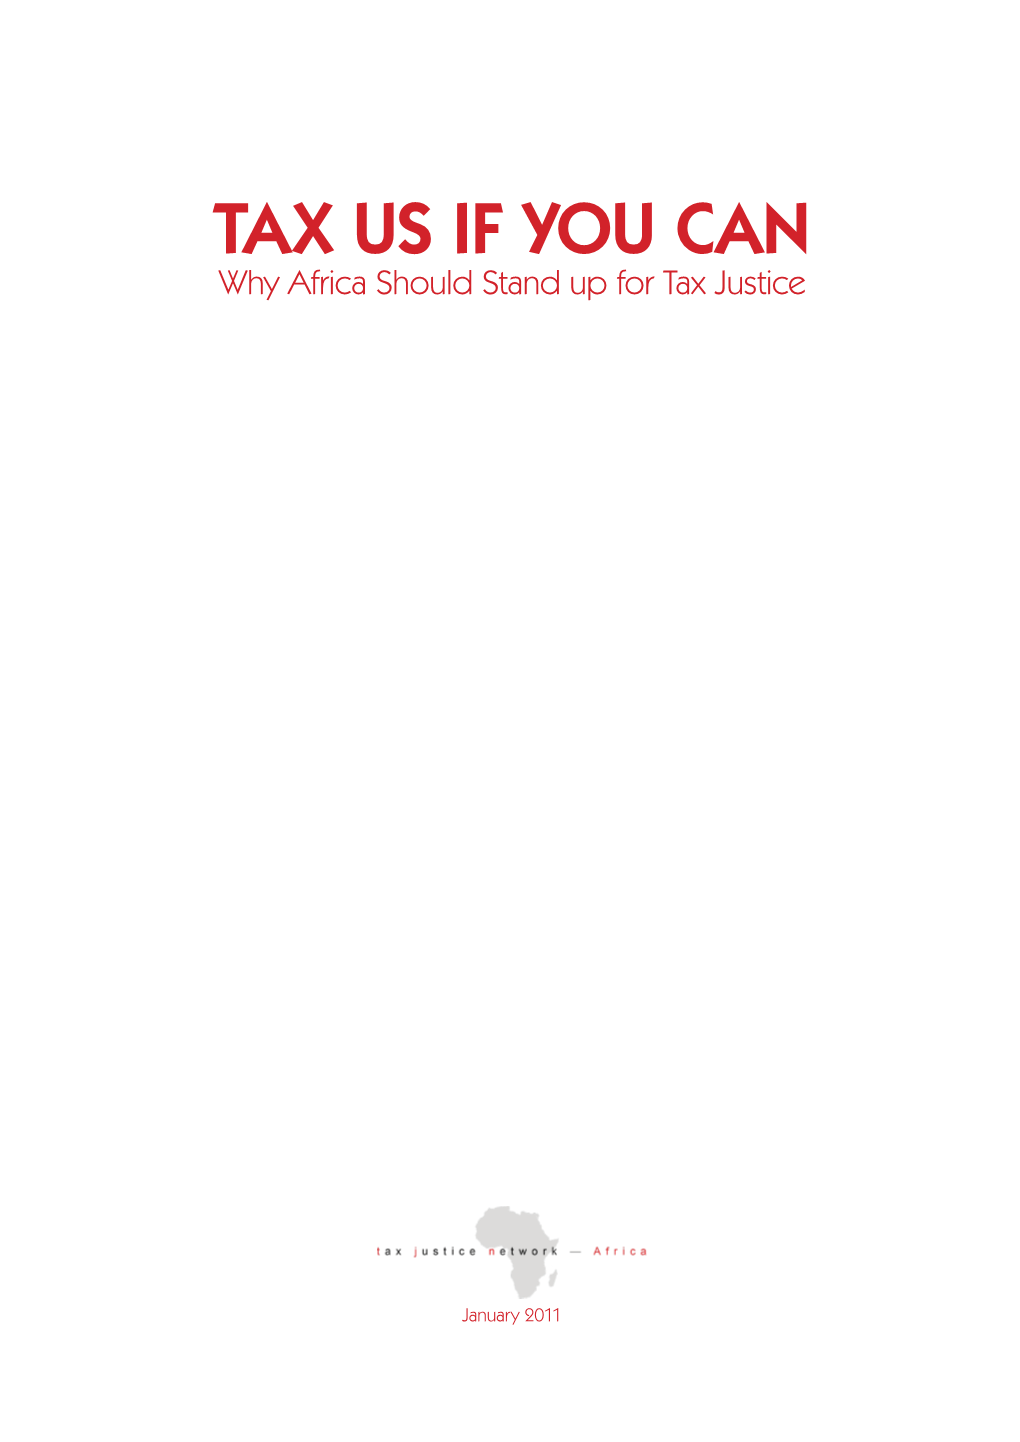 Tax Us If You Can for Africa